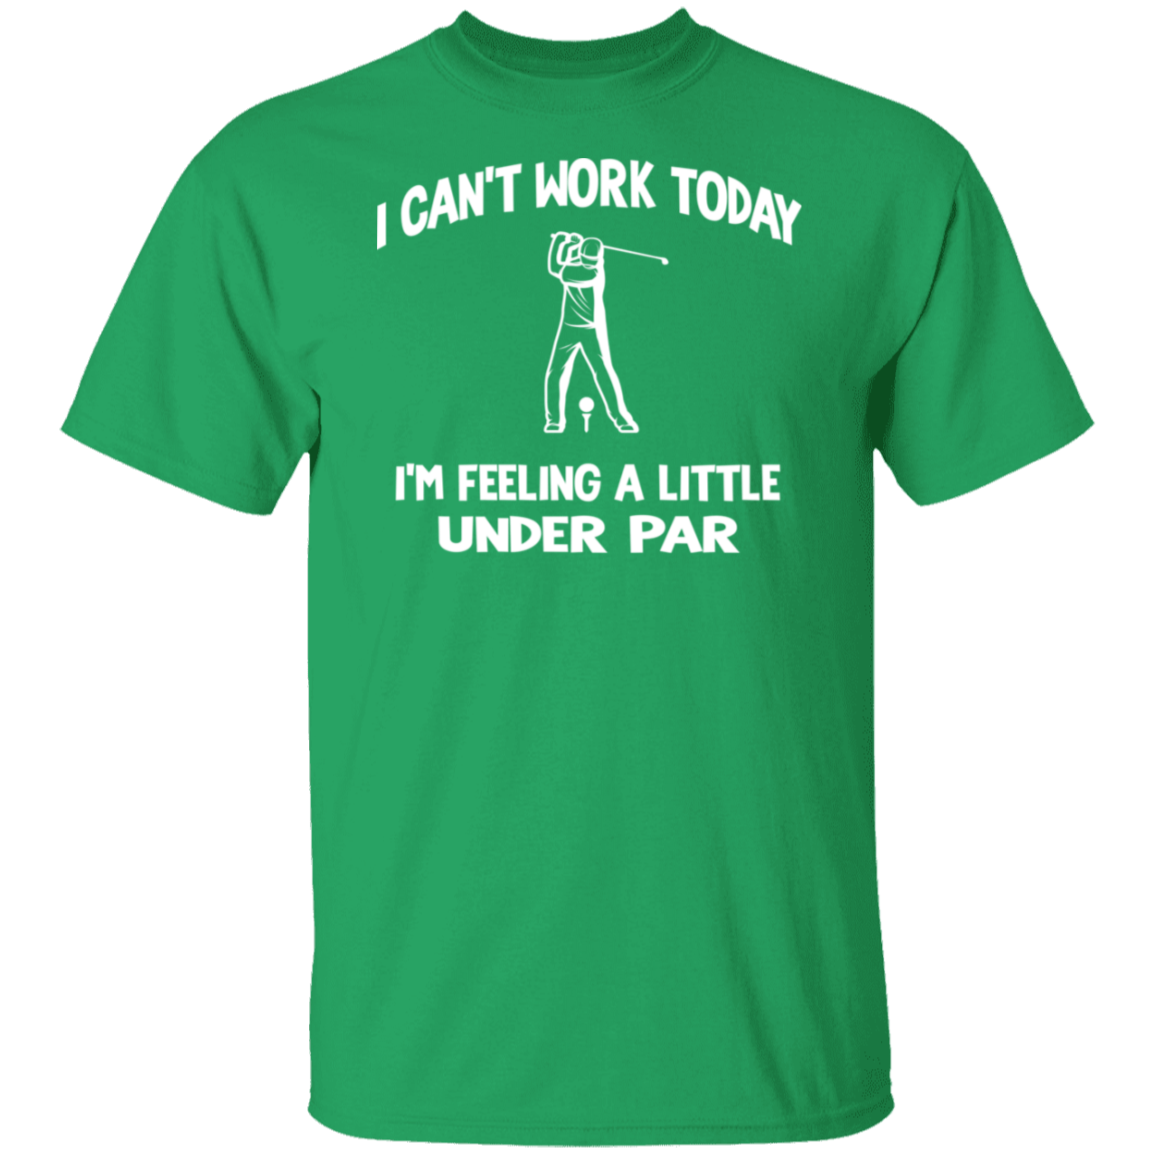 I Can't Work Today Under Par White Print T-Shirt